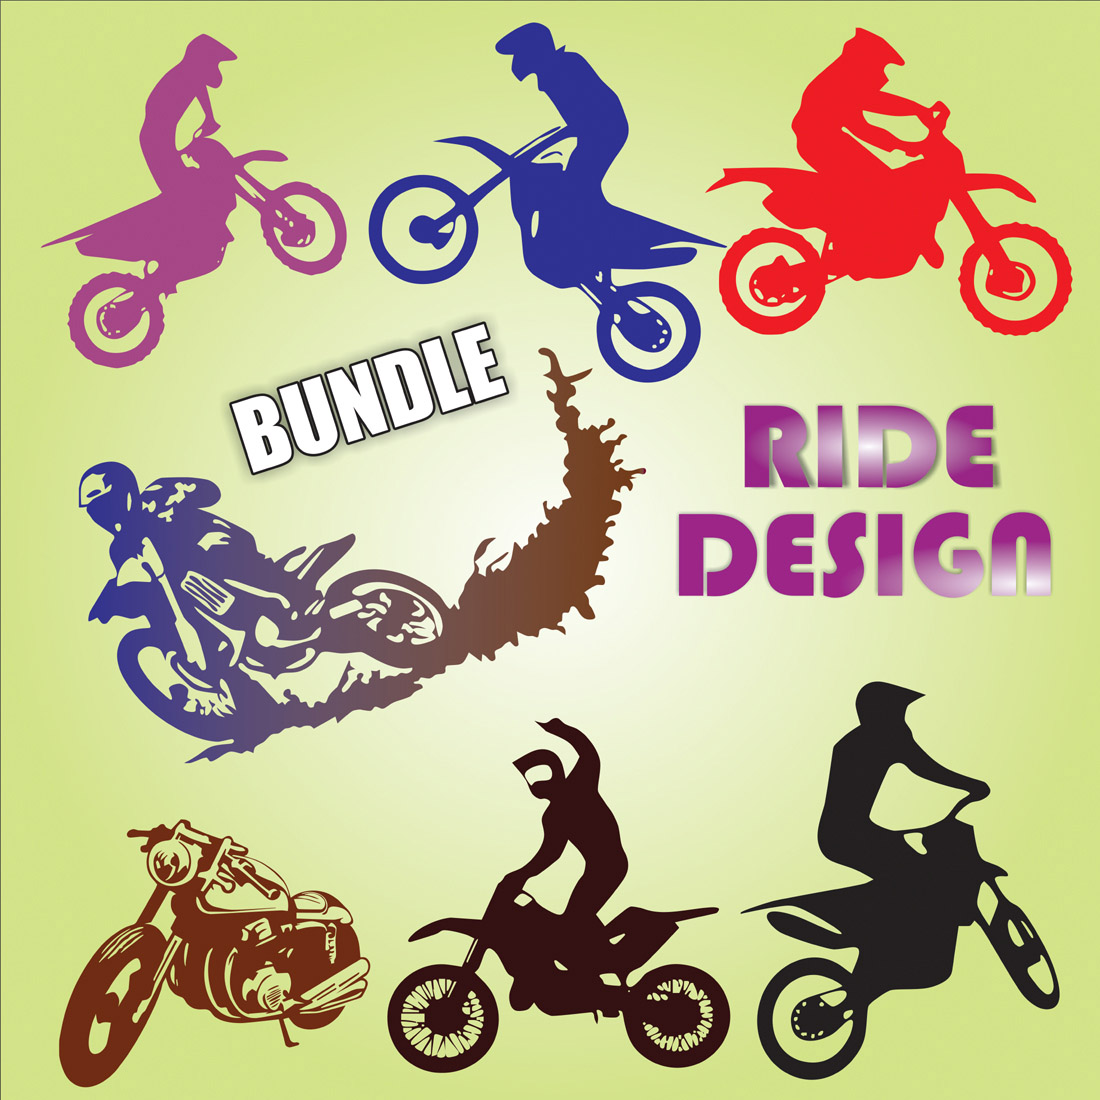 Motorcycle & Gaming T-Shirts Design 2023 High Res cover image.